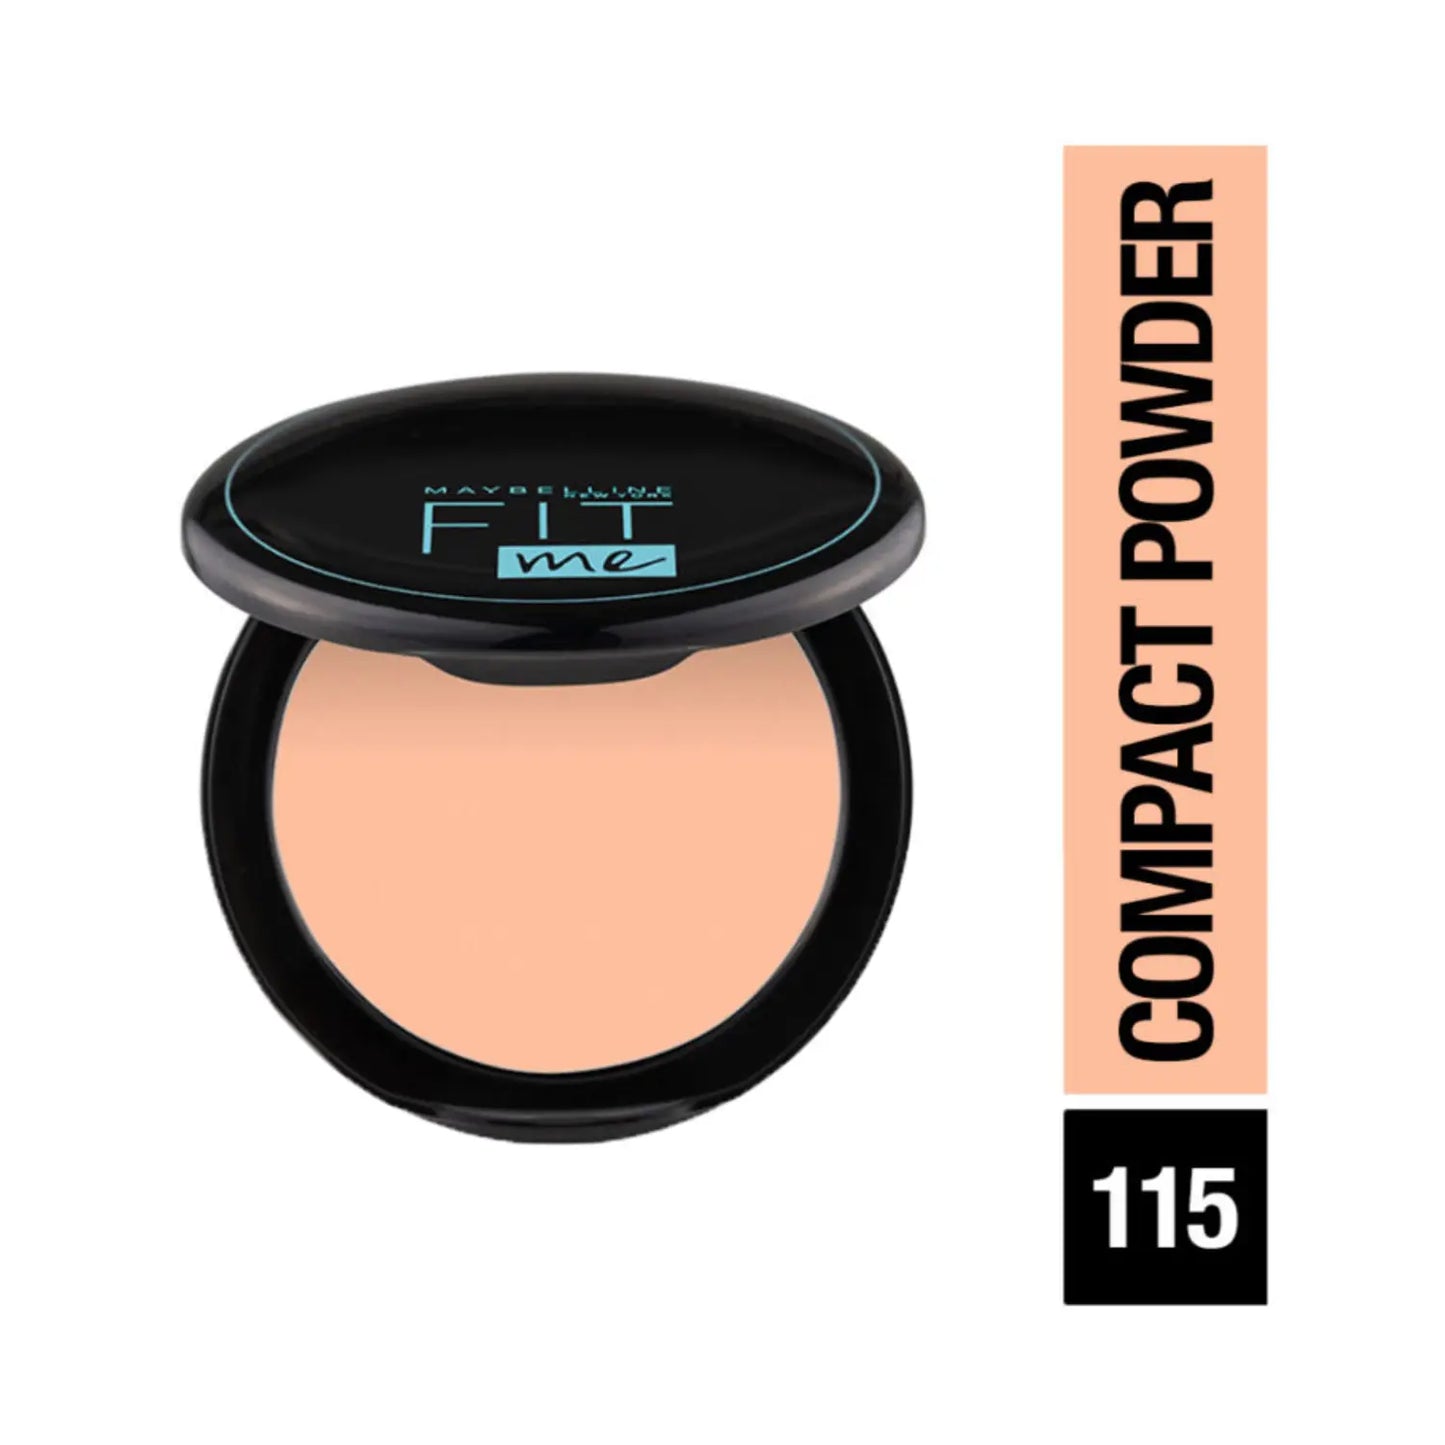 Maybelline New York Fit Me 12Hr Oil Control Compact SPF 28 - 115 Ivory (8g)